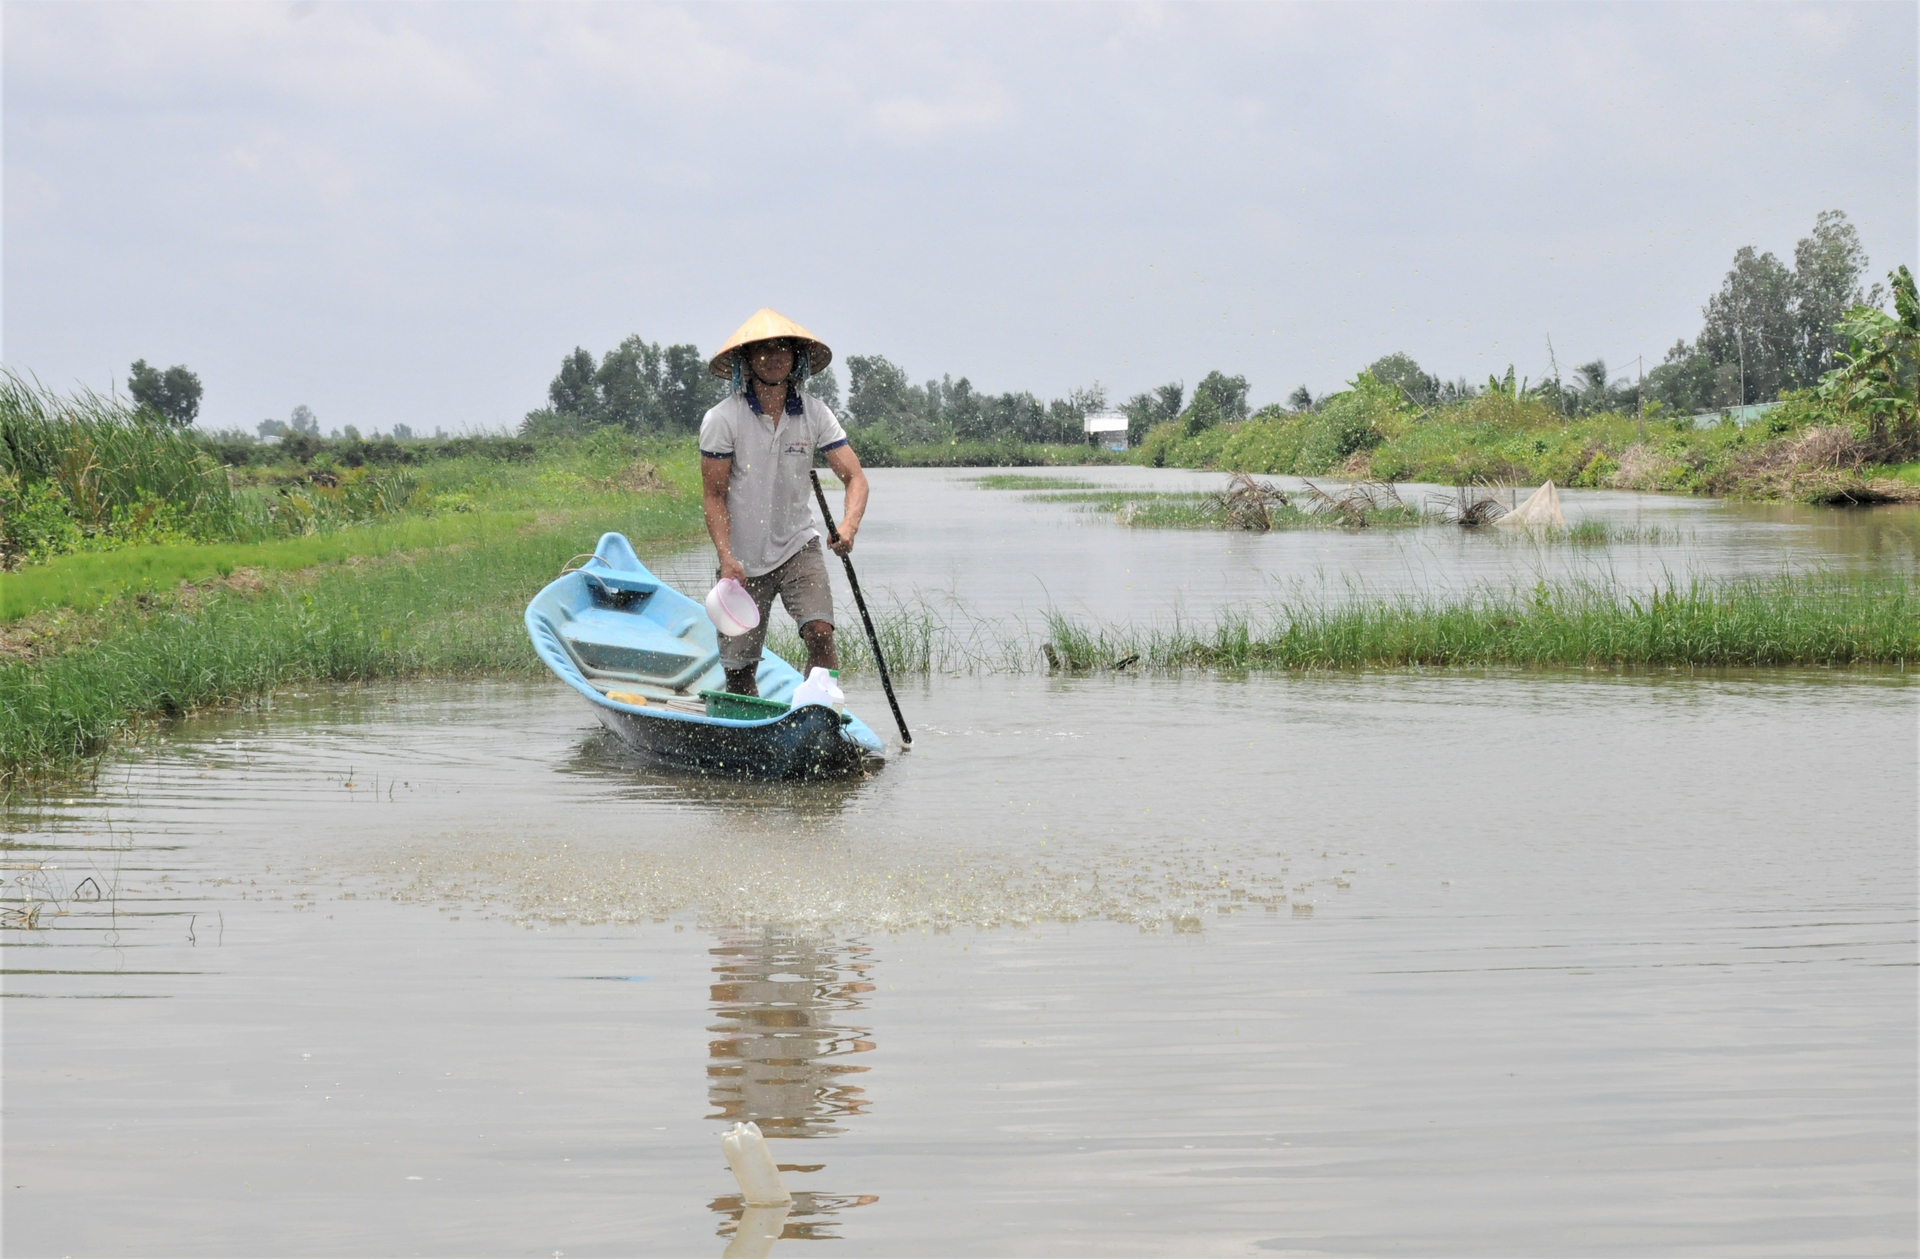 Farmers in An Minh district are actively utilizing rainwater for salinity control in their fields in preparation for the 2023-2024 rice-shrimp crop. Photo: Trung Chanh.